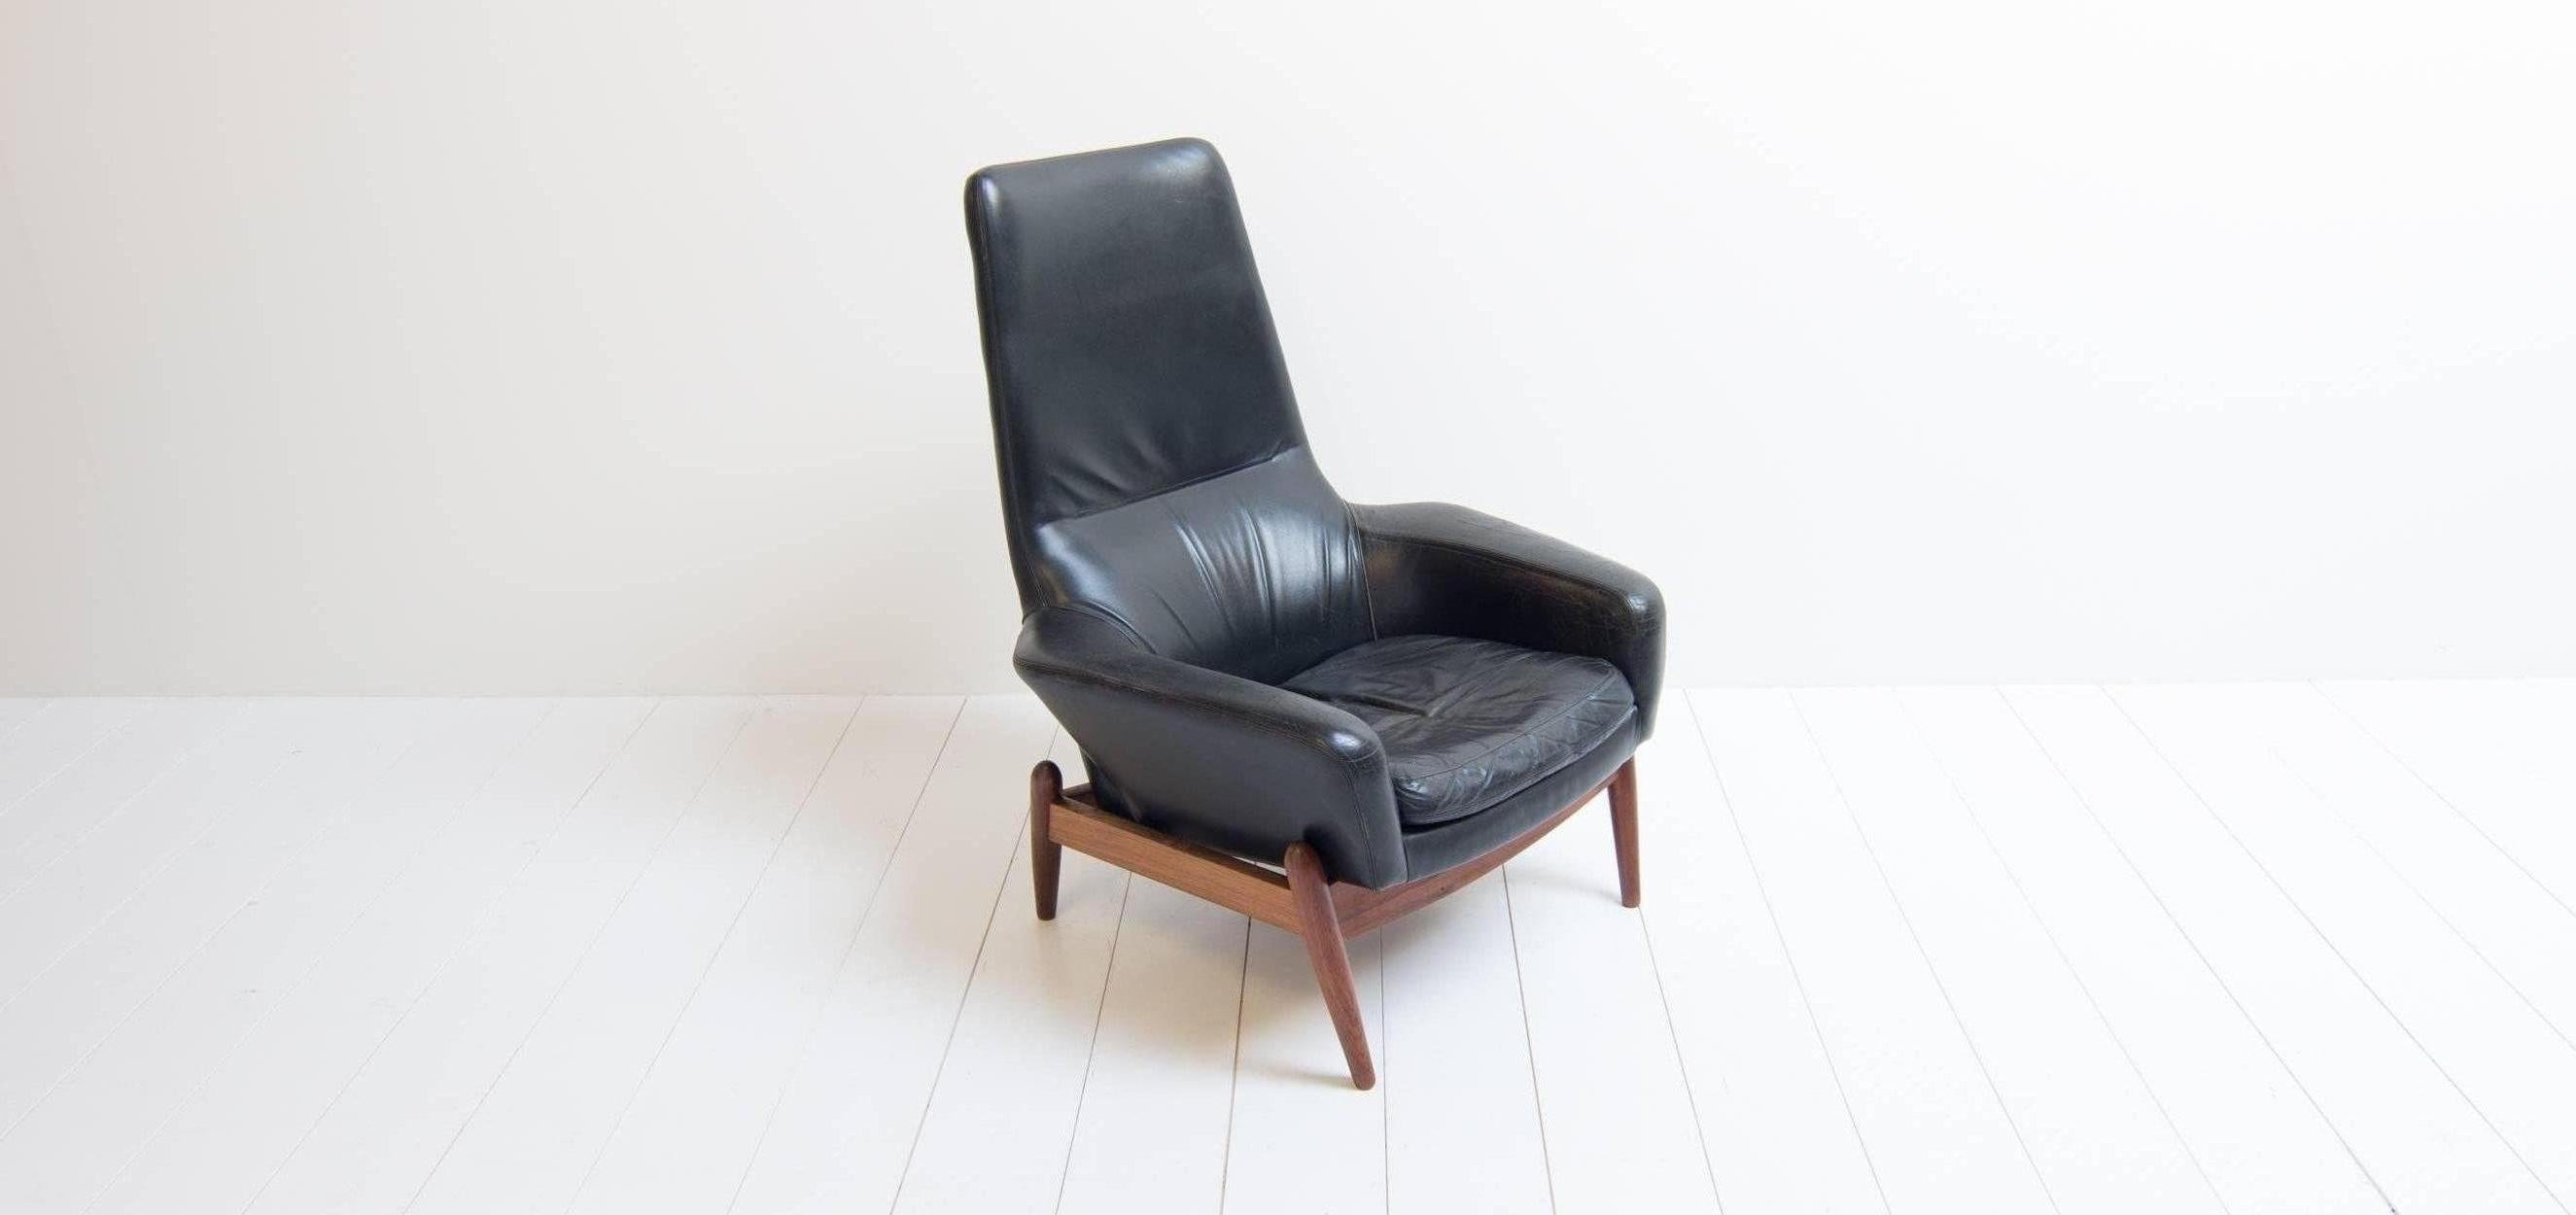 Ib Kofod Larsen Bovenkamp Lounge Chair from the 1960s For Sale 3